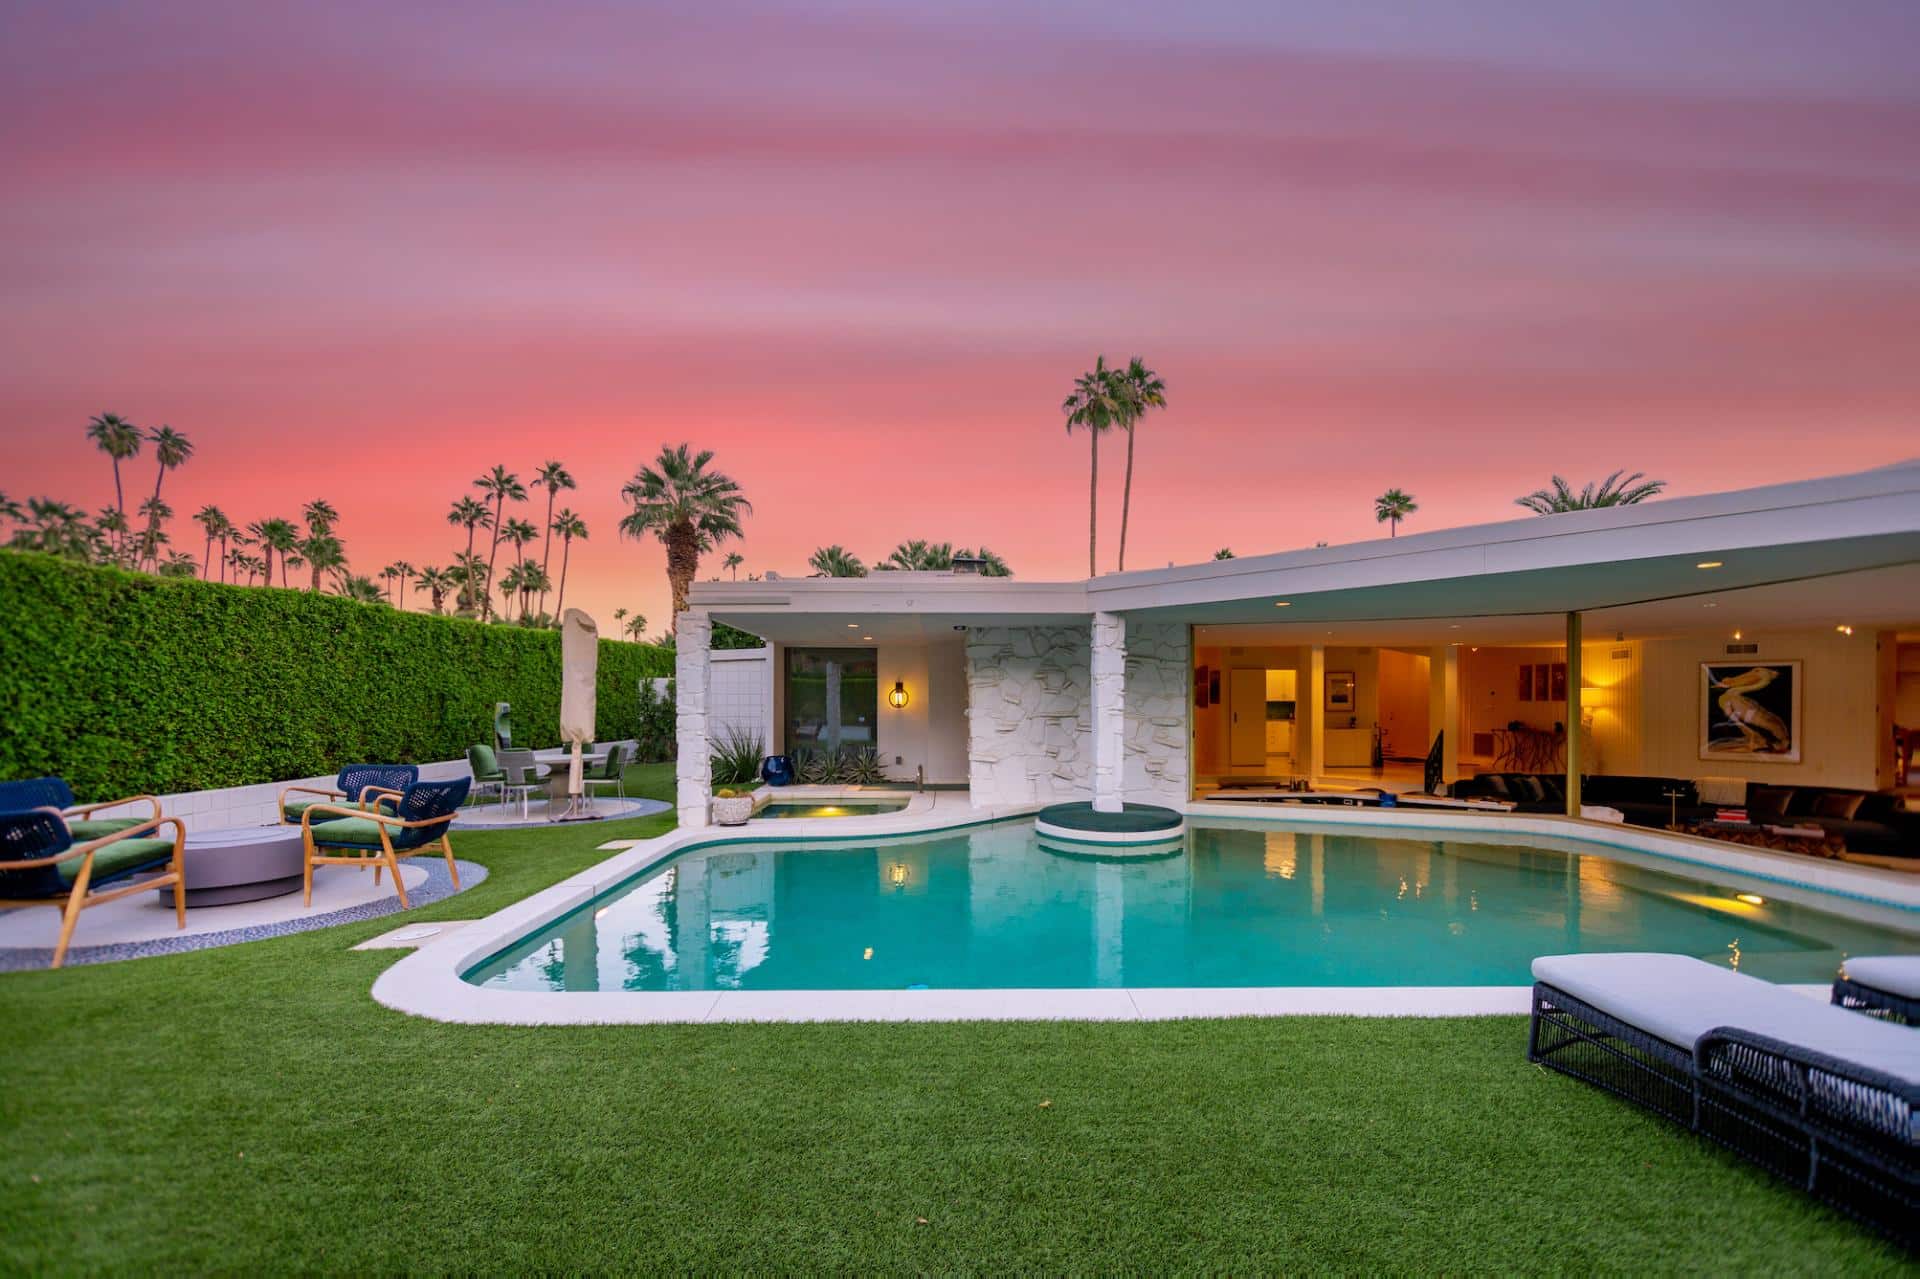 A luxurious modern house with an outdoor swimming pool at twilight, surrounded by palm trees against a pink and orange sky.